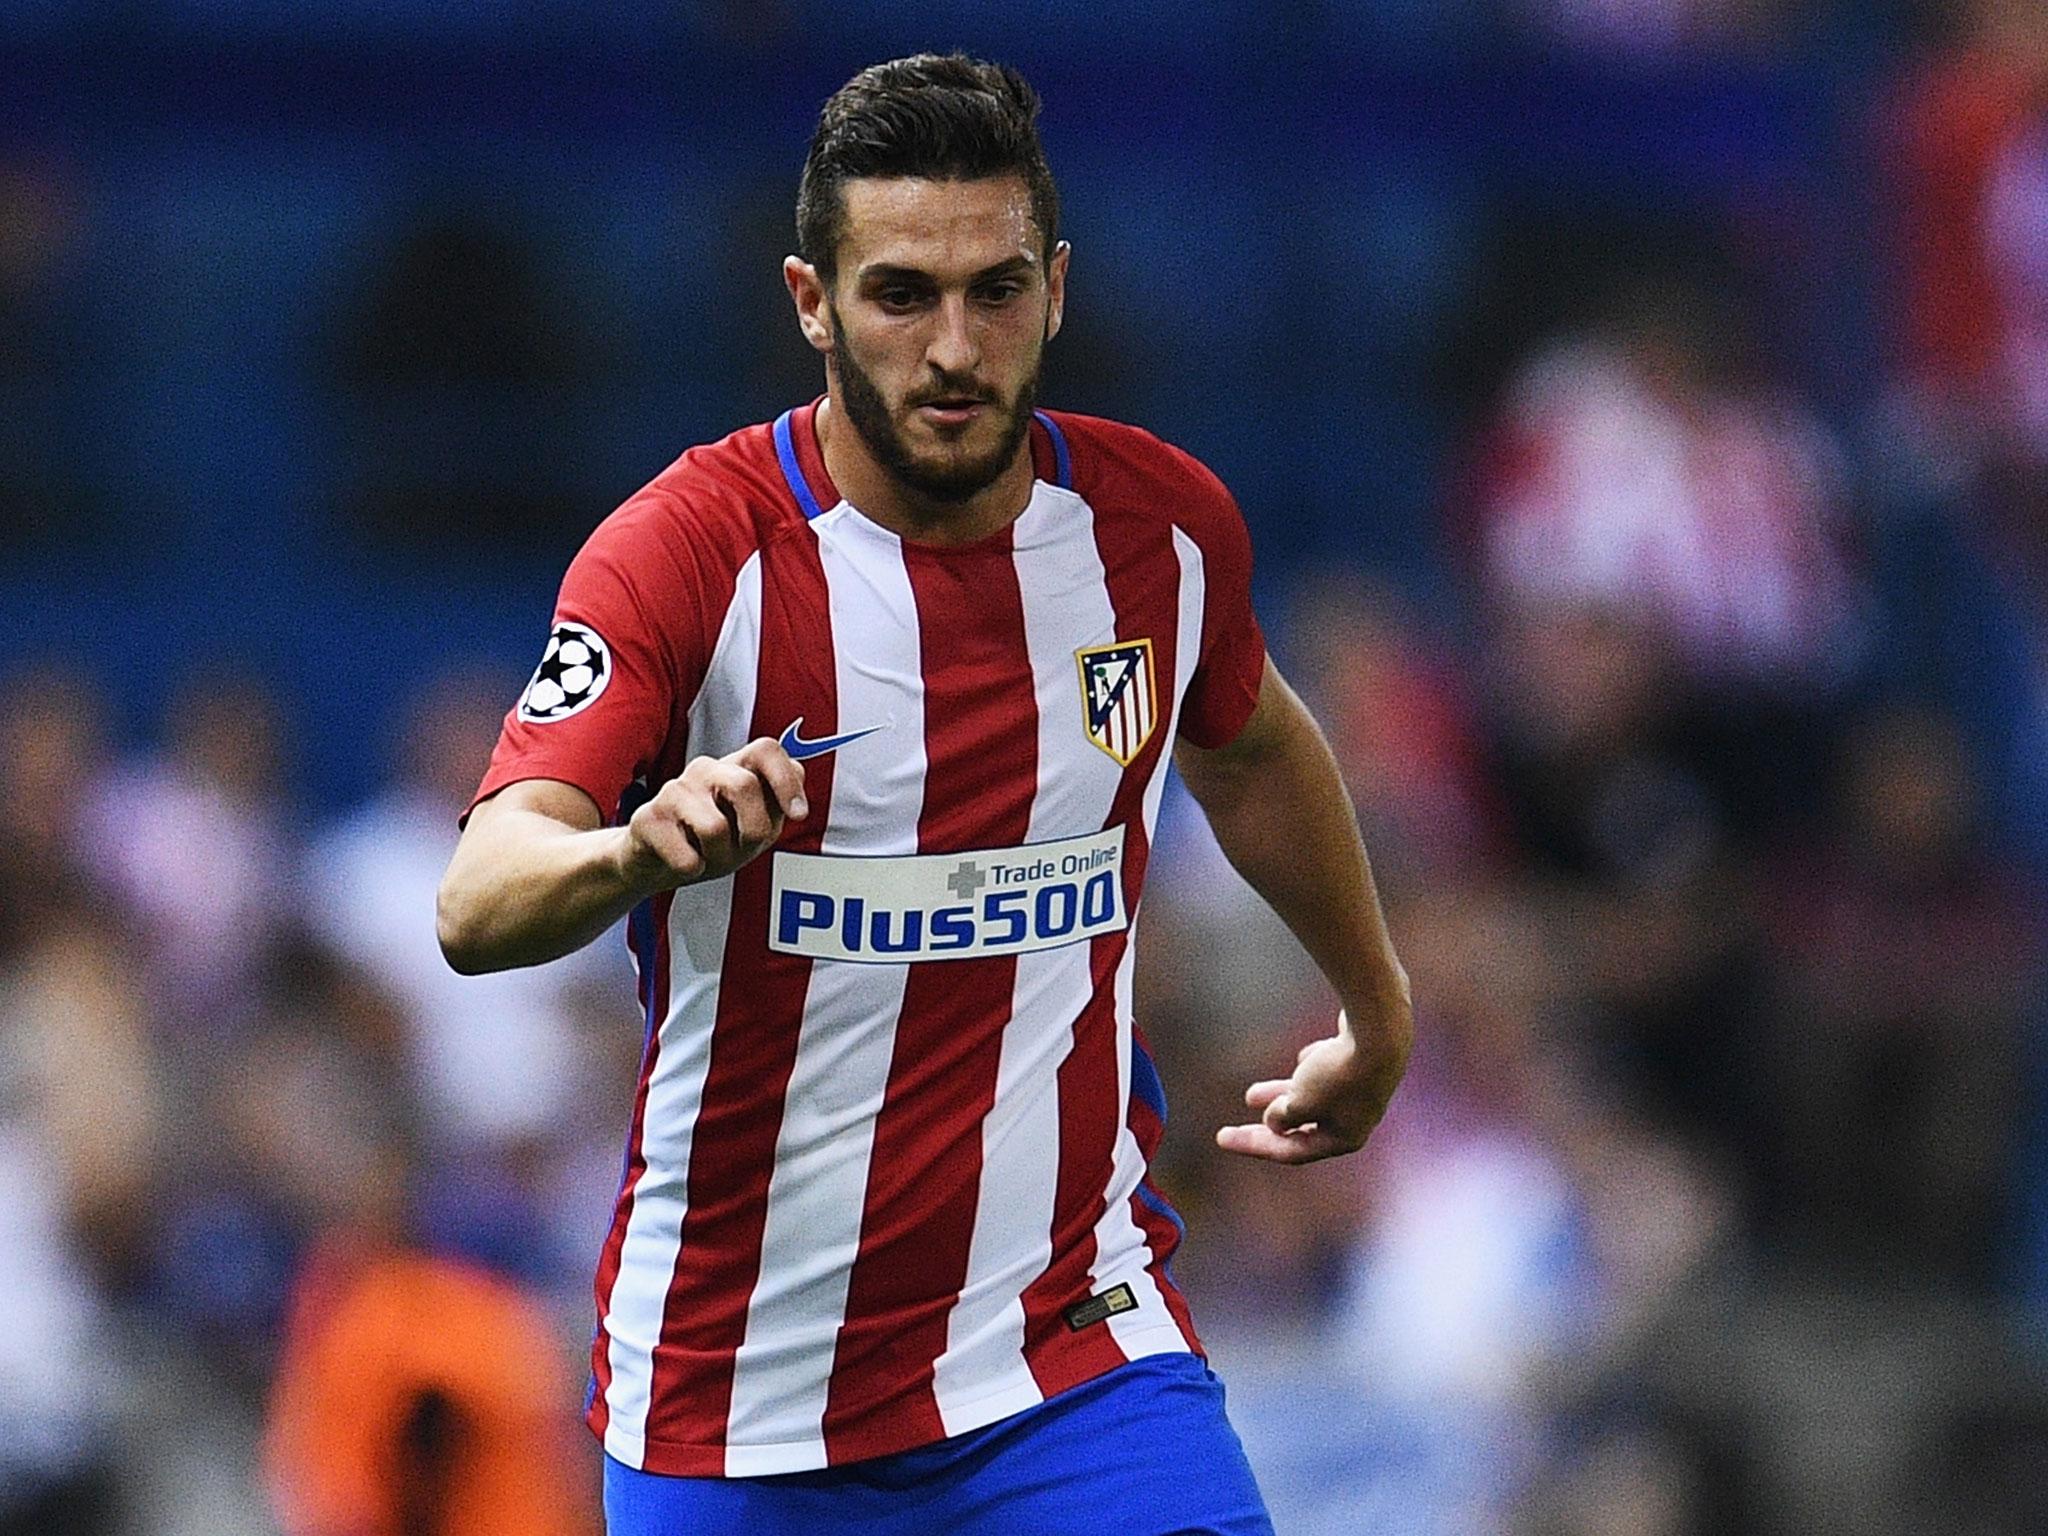 Koke has agreed a new five-year contract with Atletico Madrid